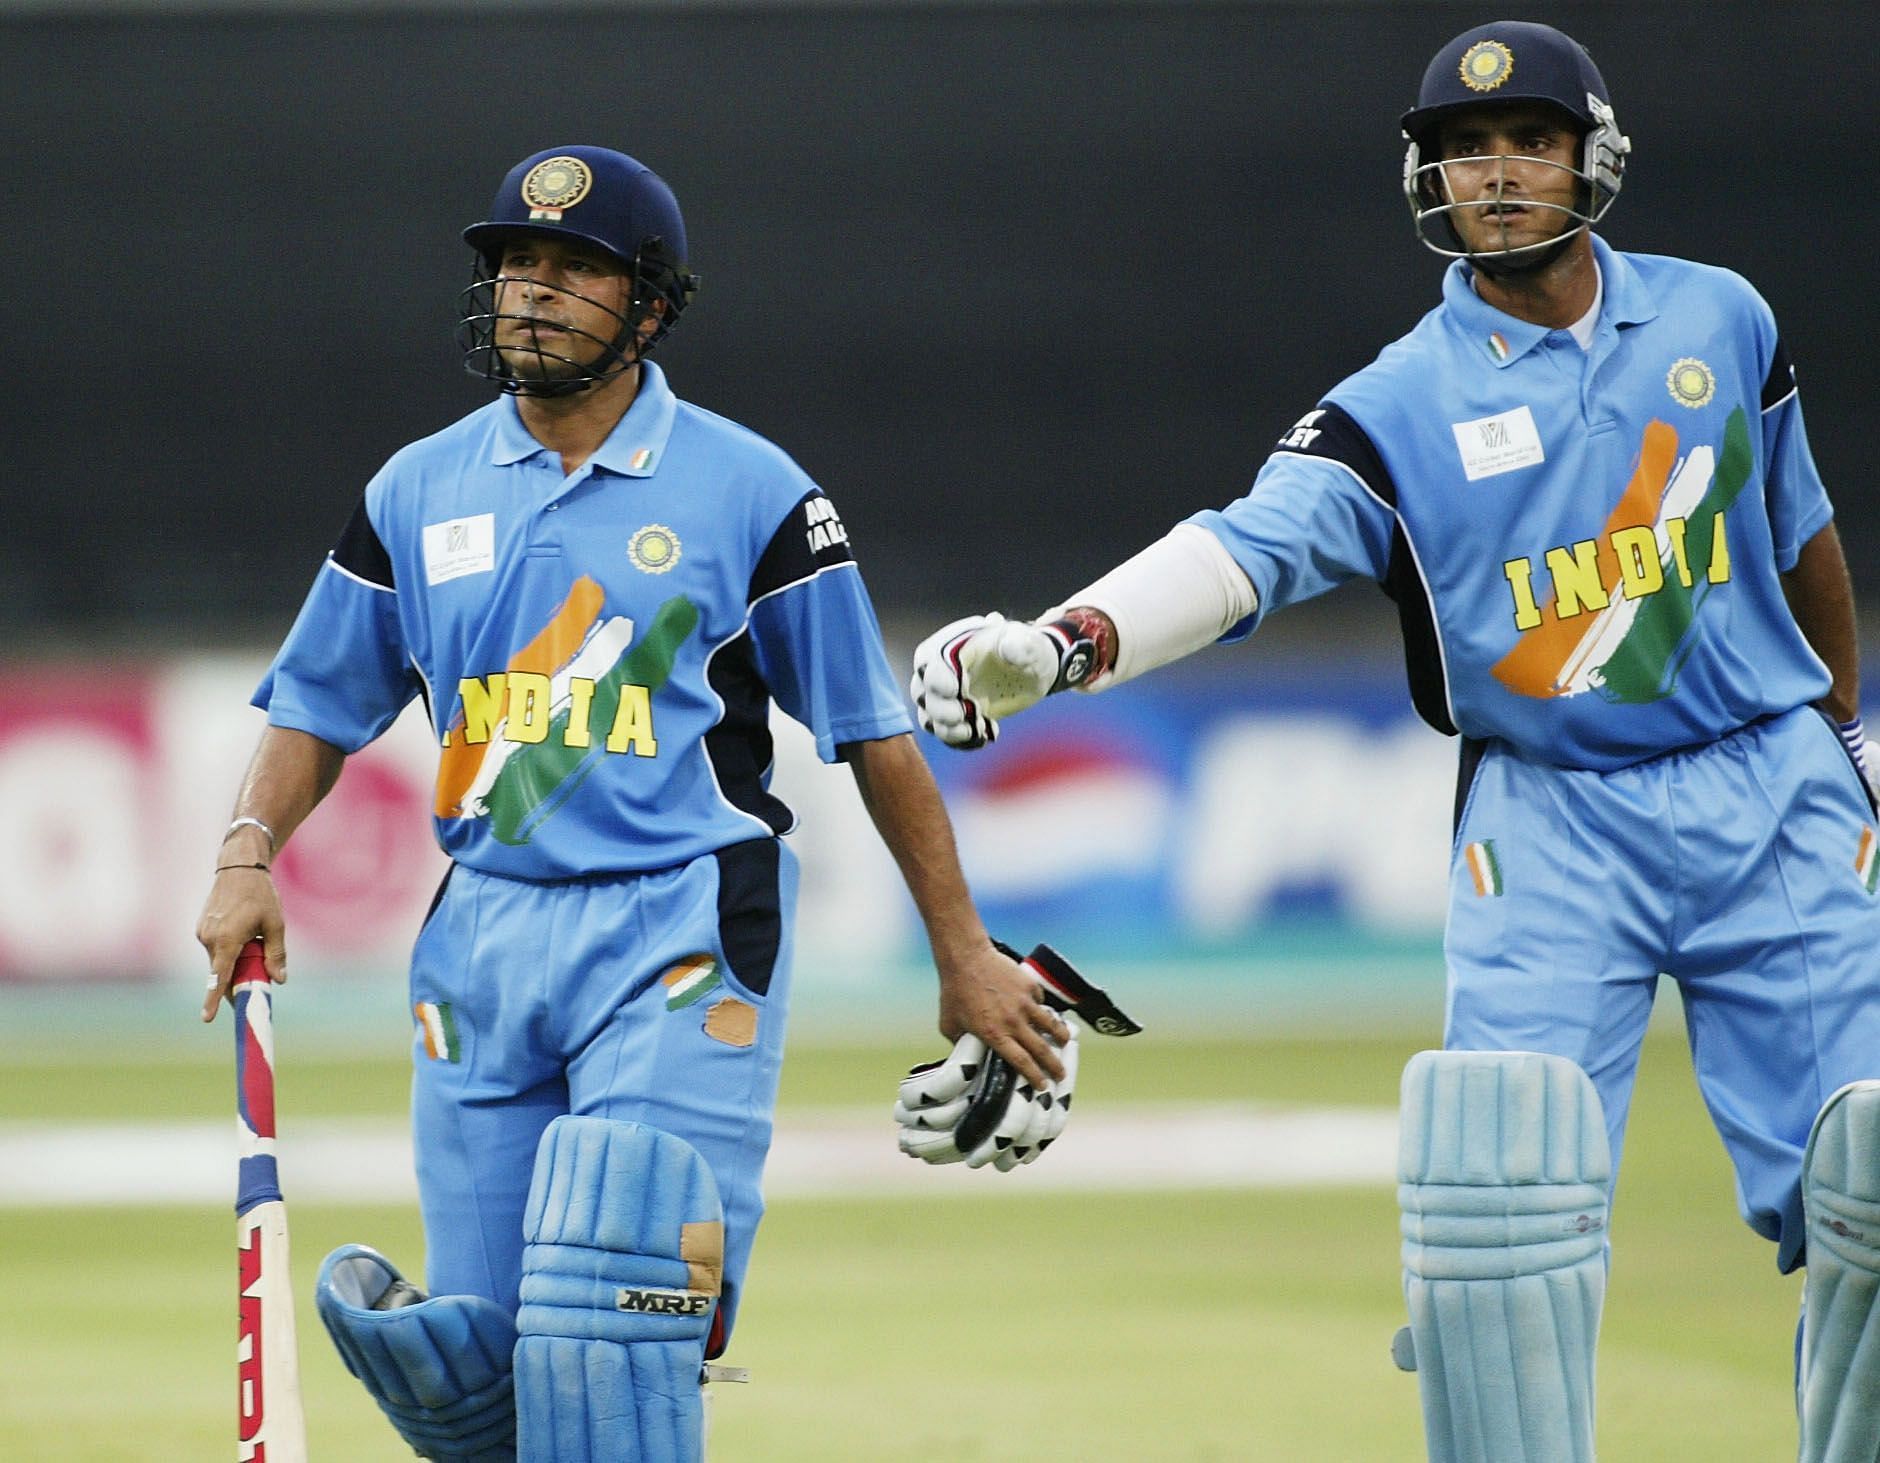 Sachin Tendulkar (left) of India is given a pat on the back by his partner Sourav Ganguly